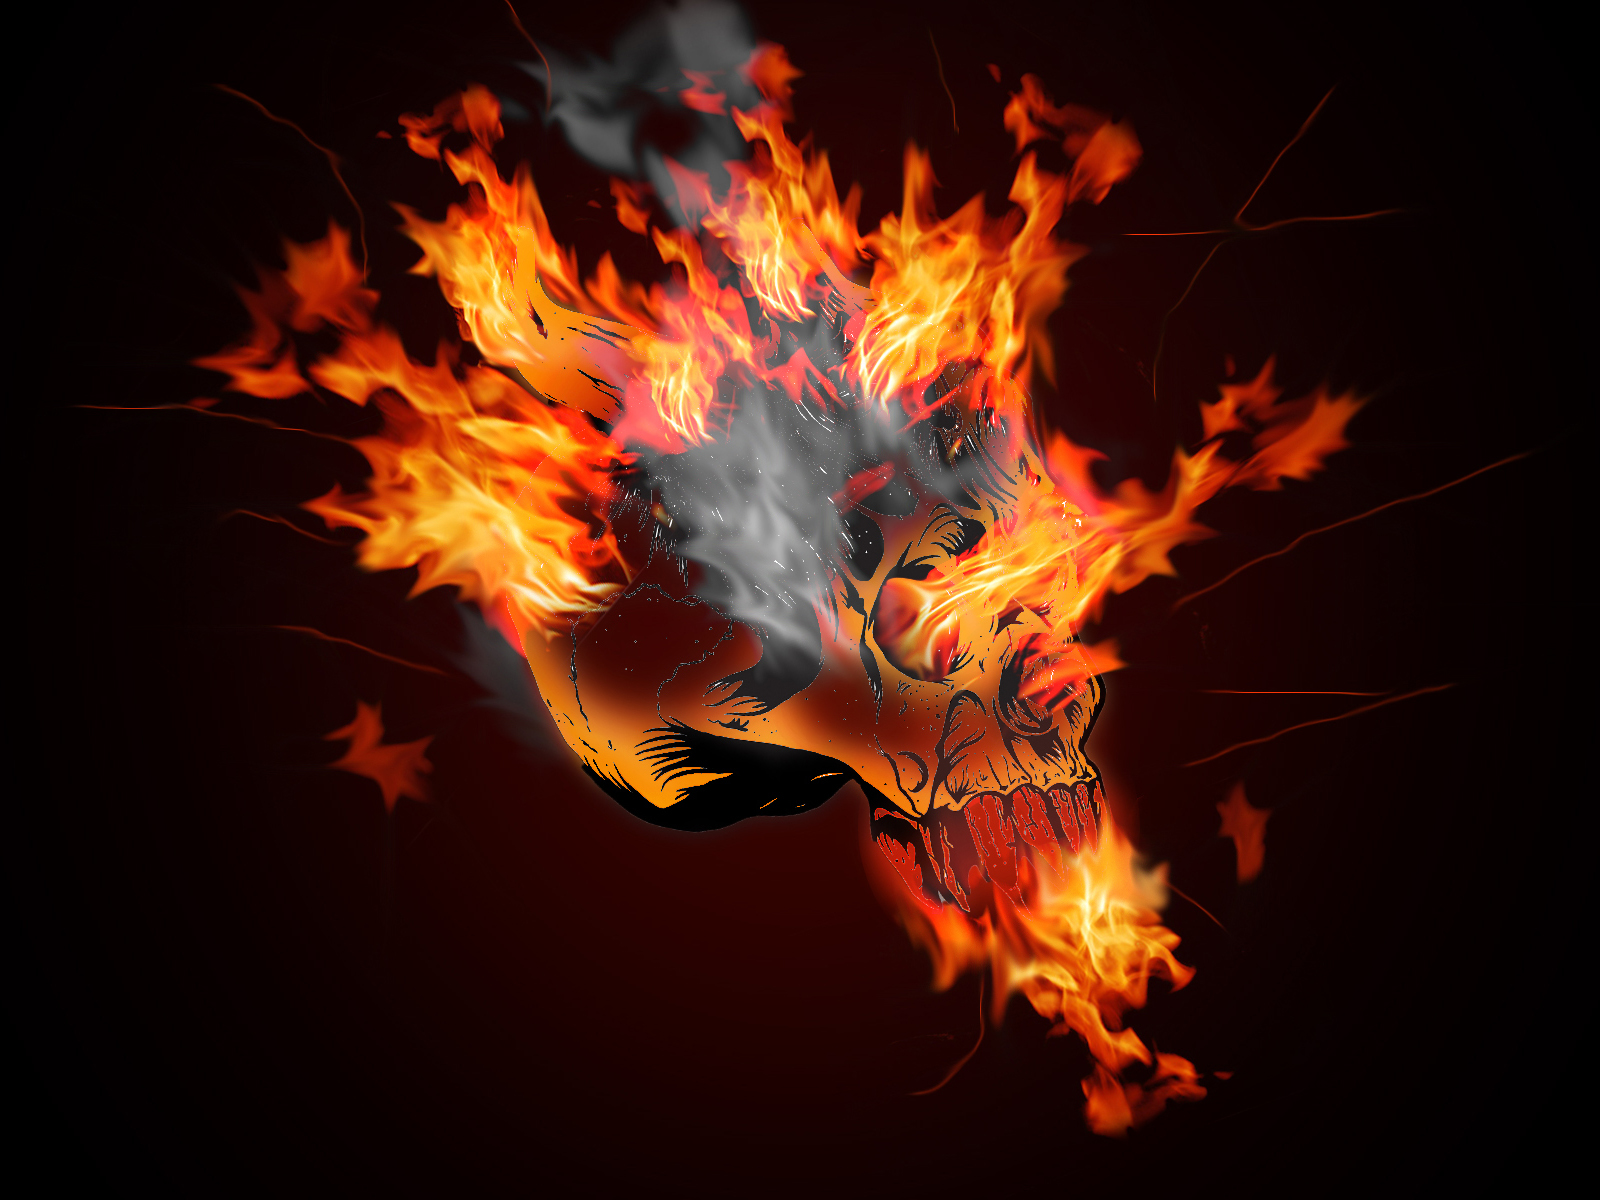 Wallpaper Skull From Which Flames Break Out